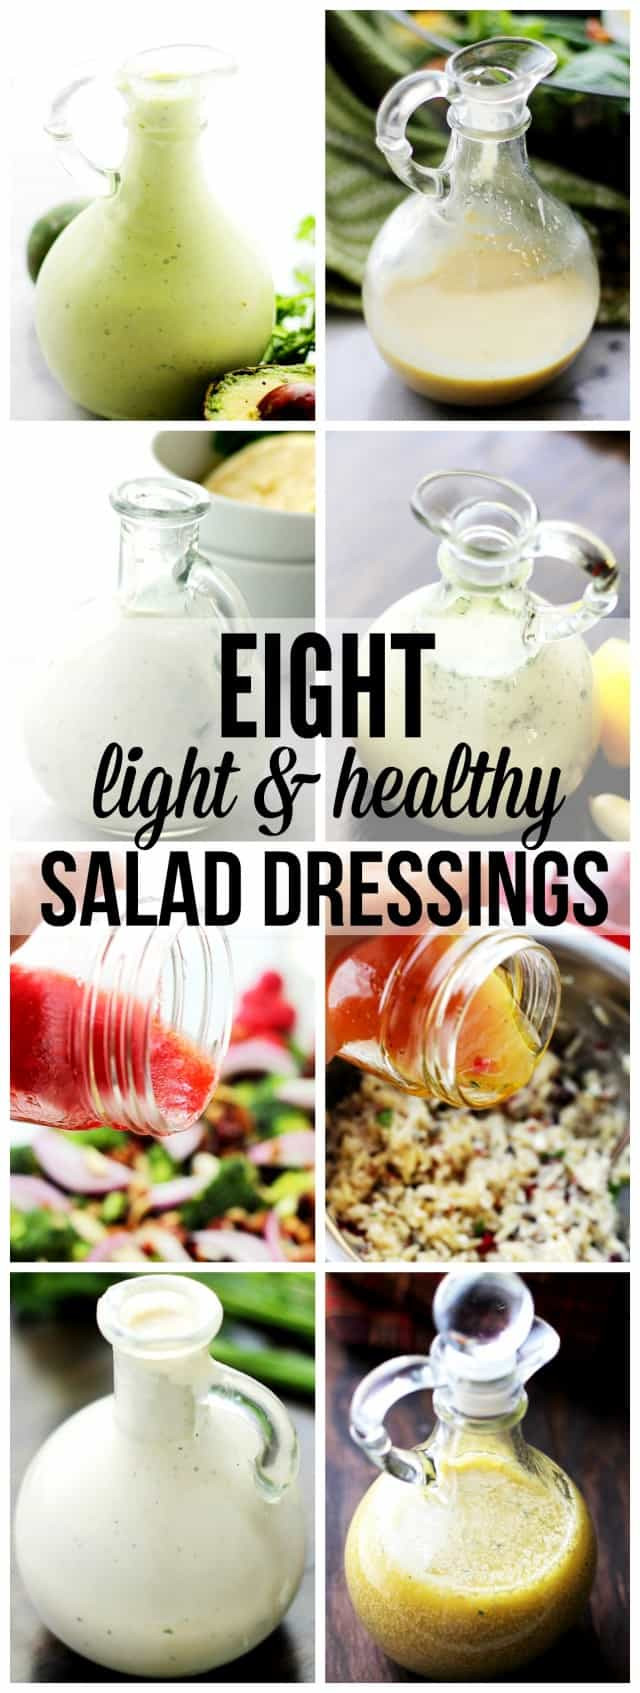 Healthiest Salad Dressings
 Eight Light and Healthy Homemade Salad Dressings Recipes